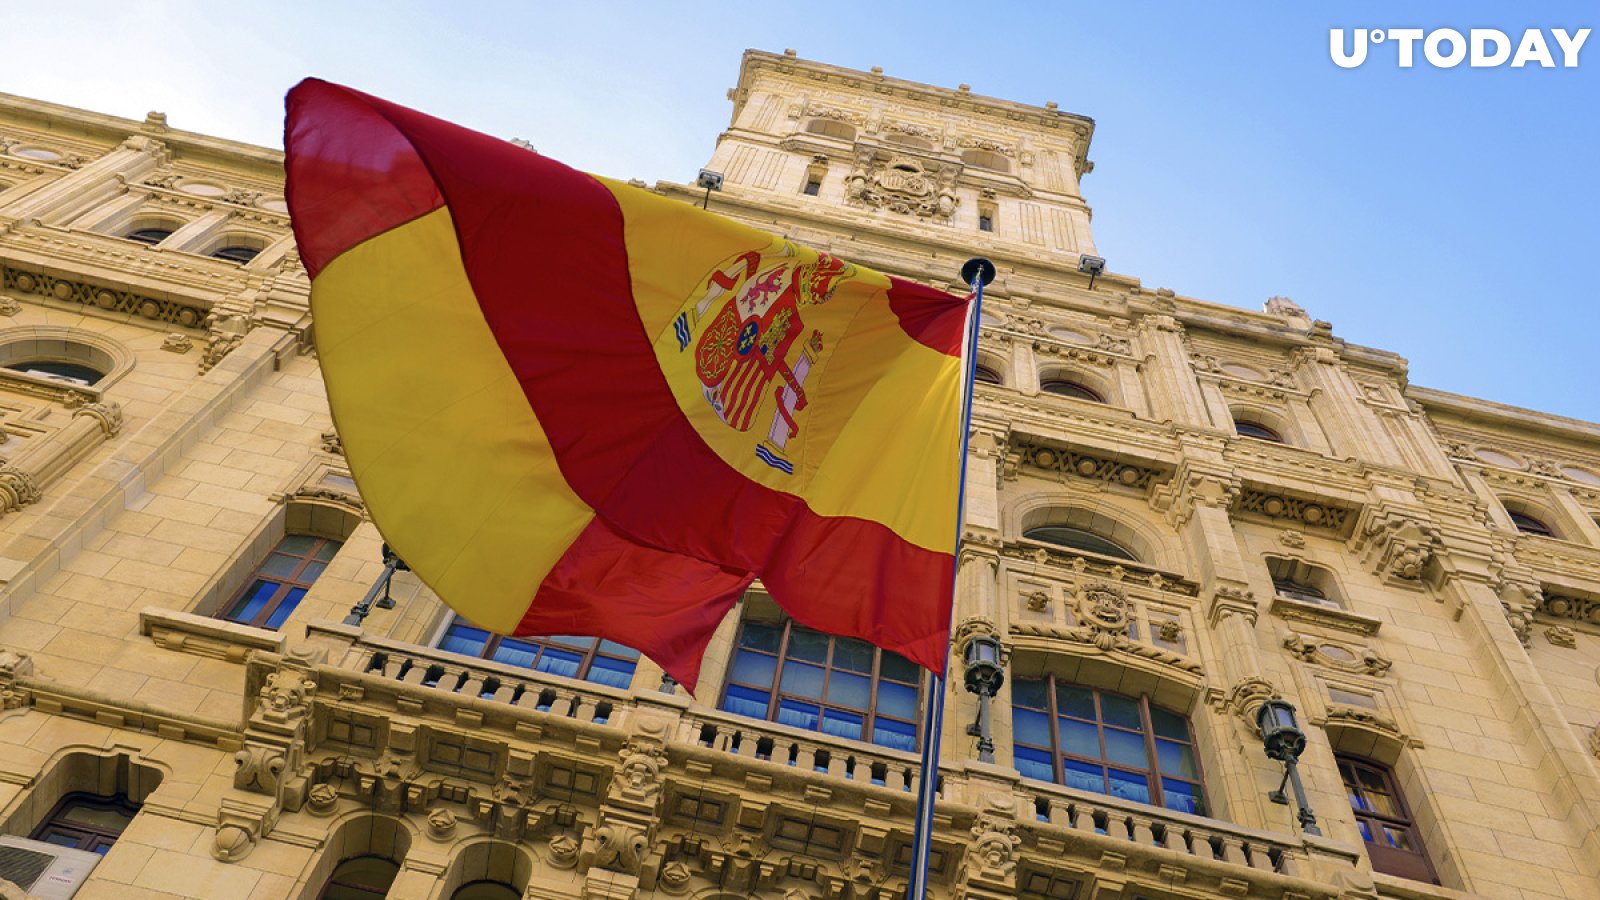 JUST IN: Spanish Government to Force Crypto Owners to Disclose Their Holdings and Gains